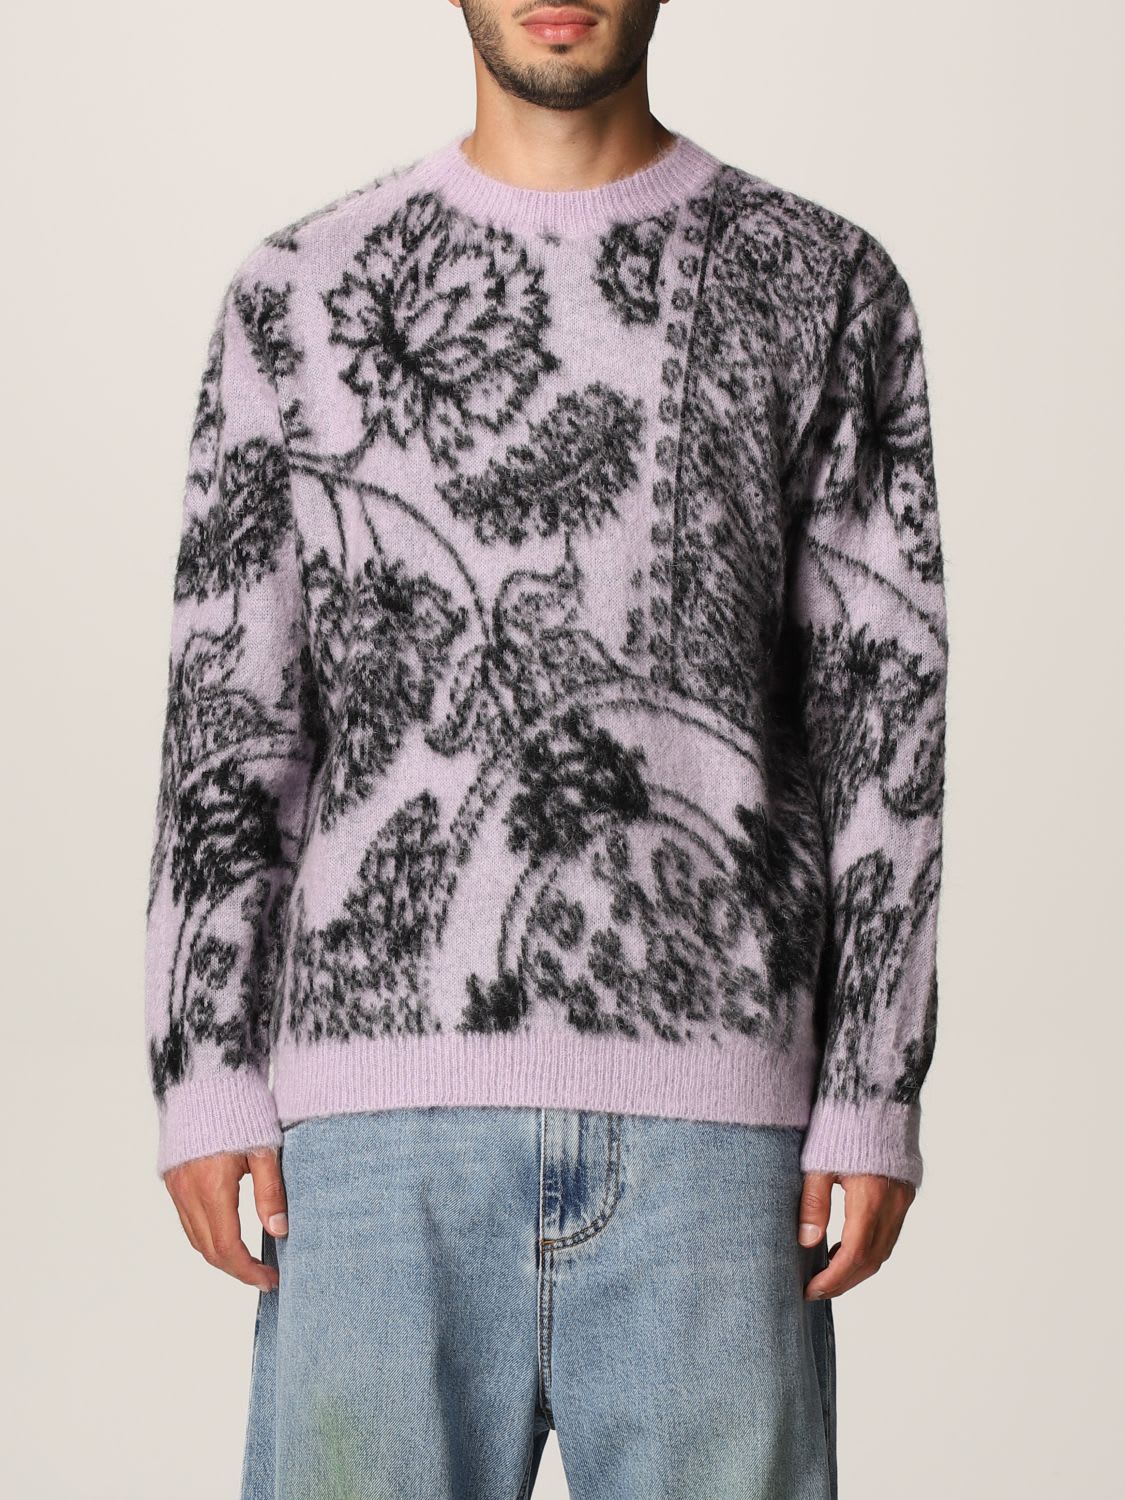 Msgm Sweater Msgm Pullover In Patterned Merino Wool